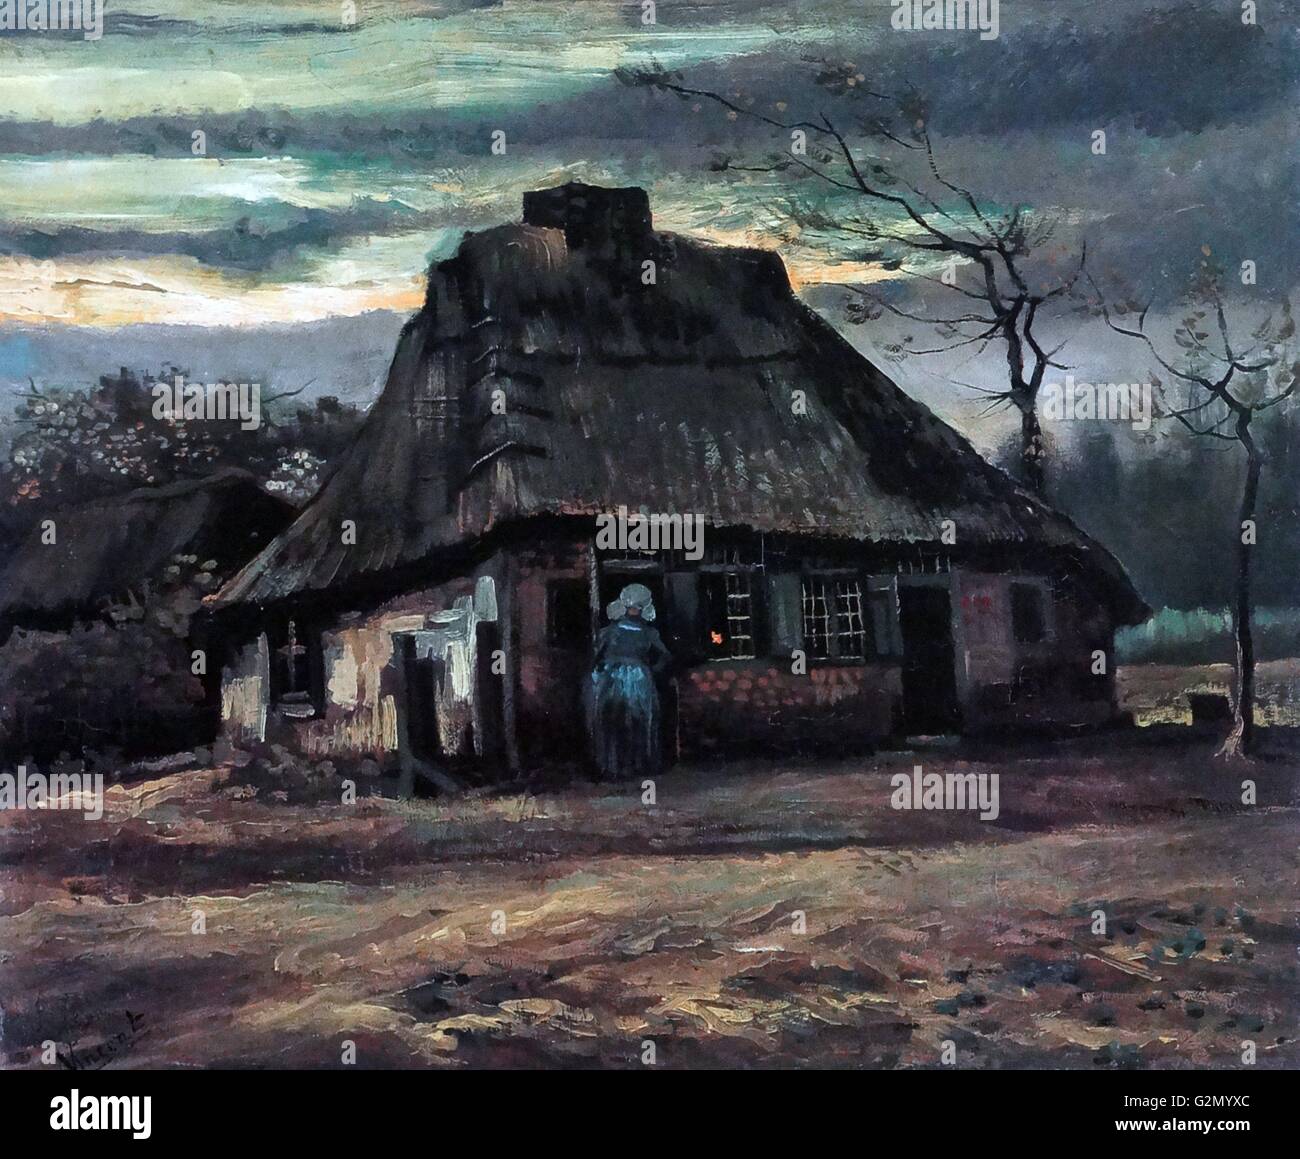 Painting by the famous Dutch artist Vincent Van Gogh (30th March 1853 - 29th July 1890), work titled 'The hut la chaumiere'. Completed in 1885. Stock Photo